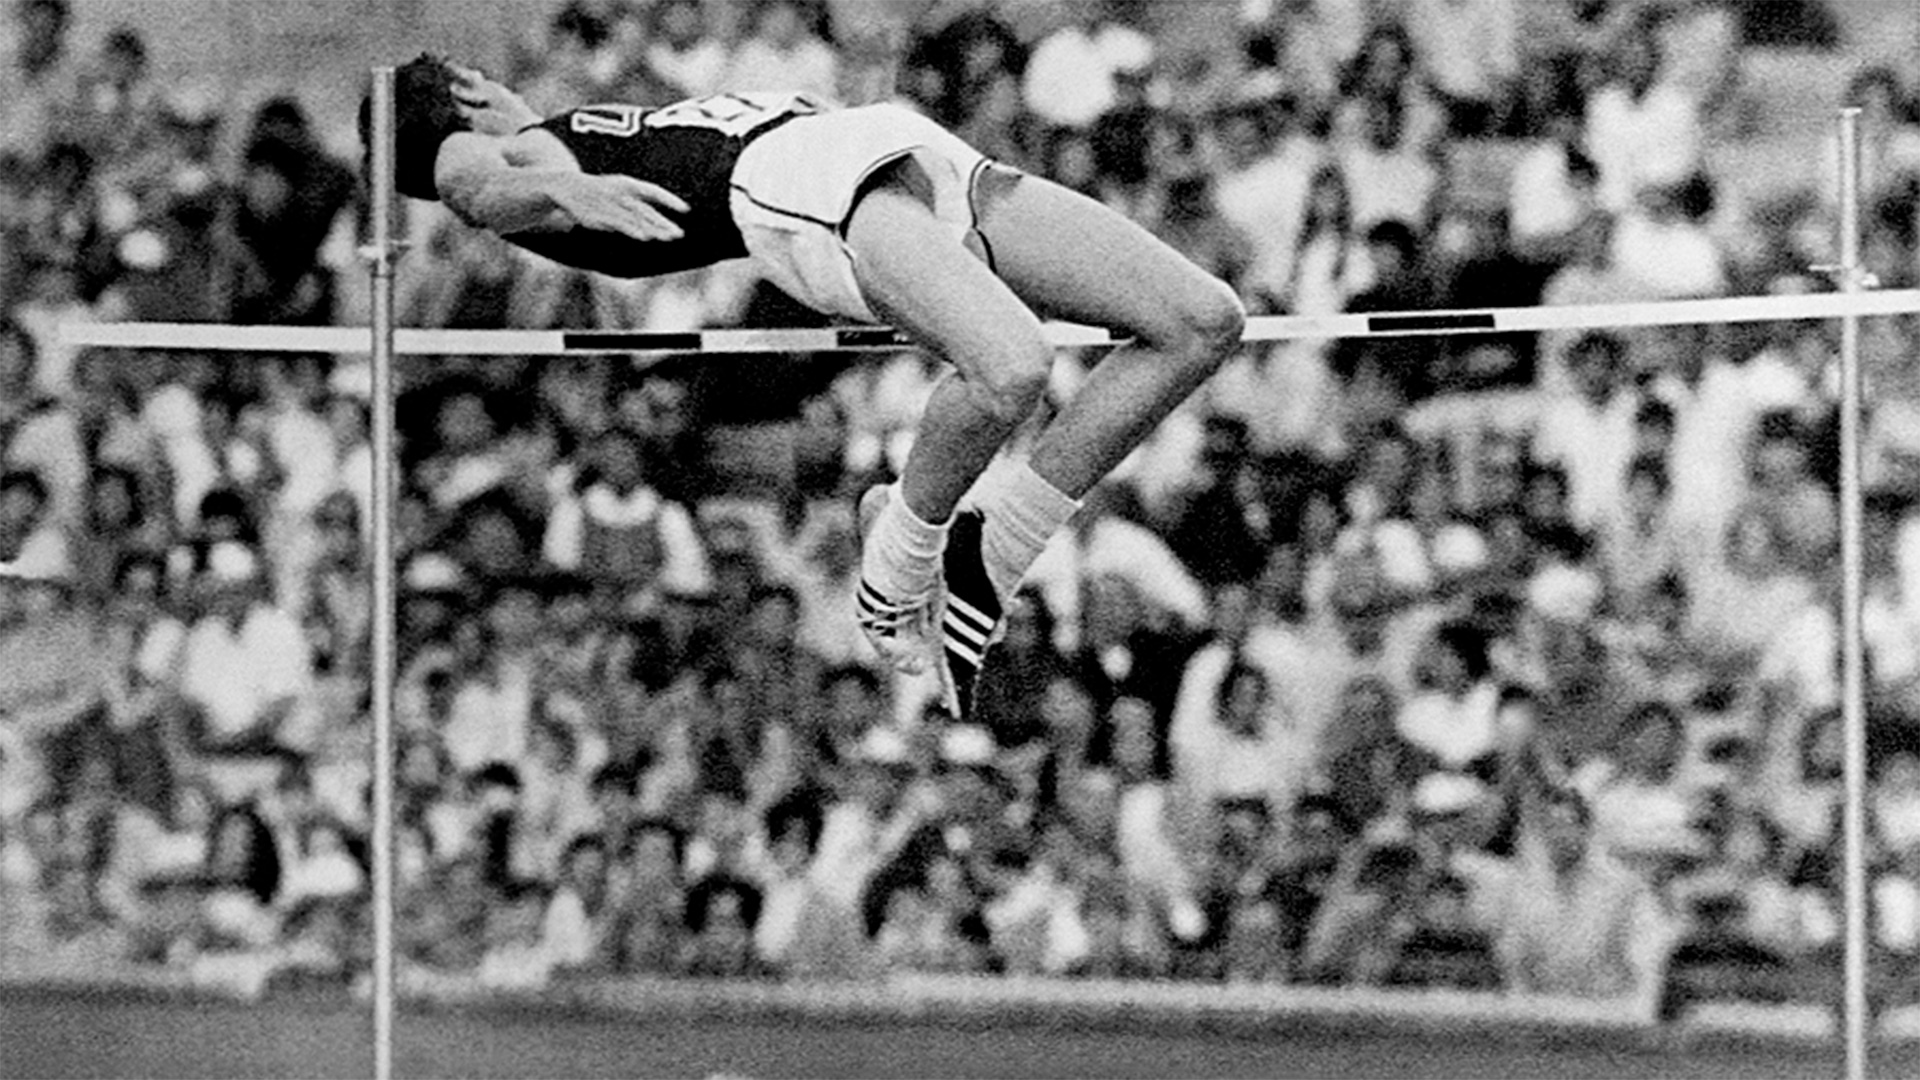 Athletics goodbye to Dick Fosbury, the “nut job” who couldn’t play sports and revolutionized high jumping